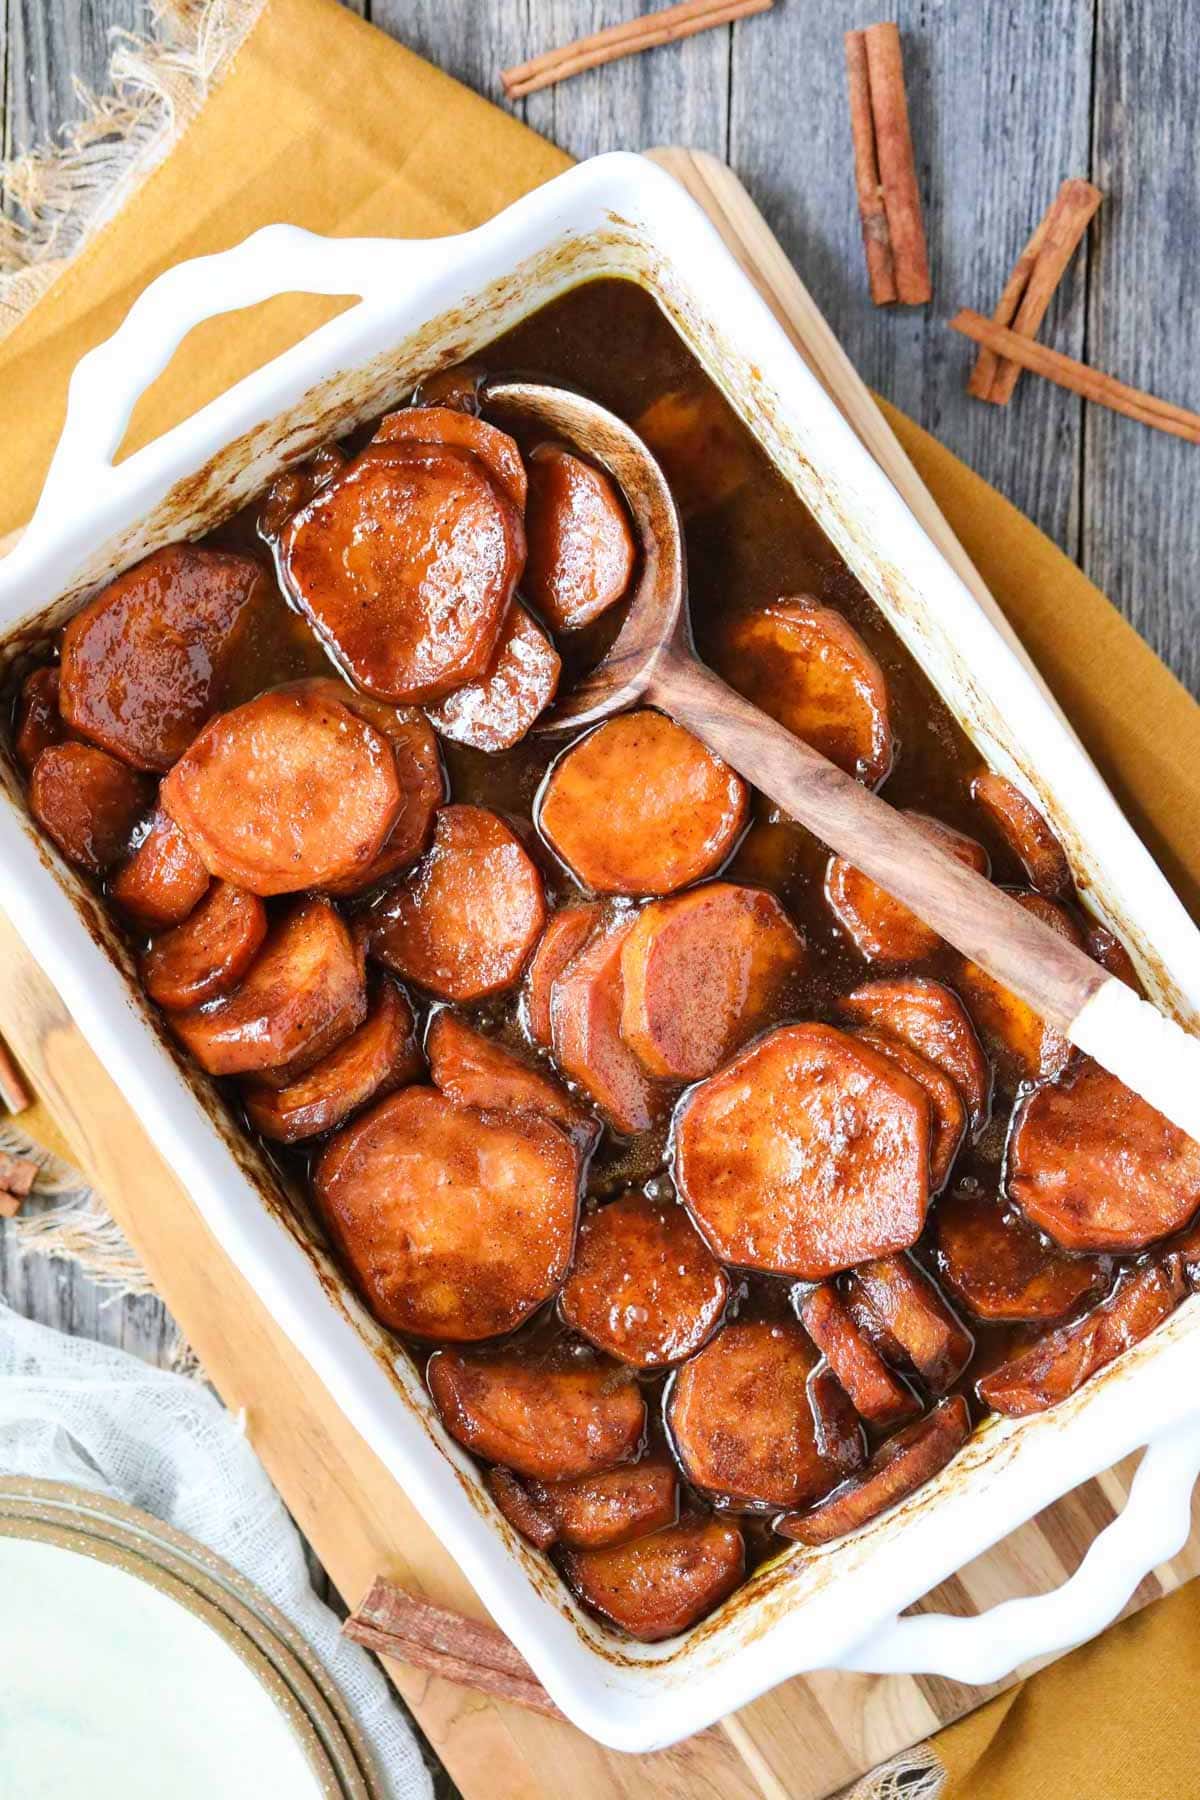 southern candied yams in a baking dish on a wooden surface.